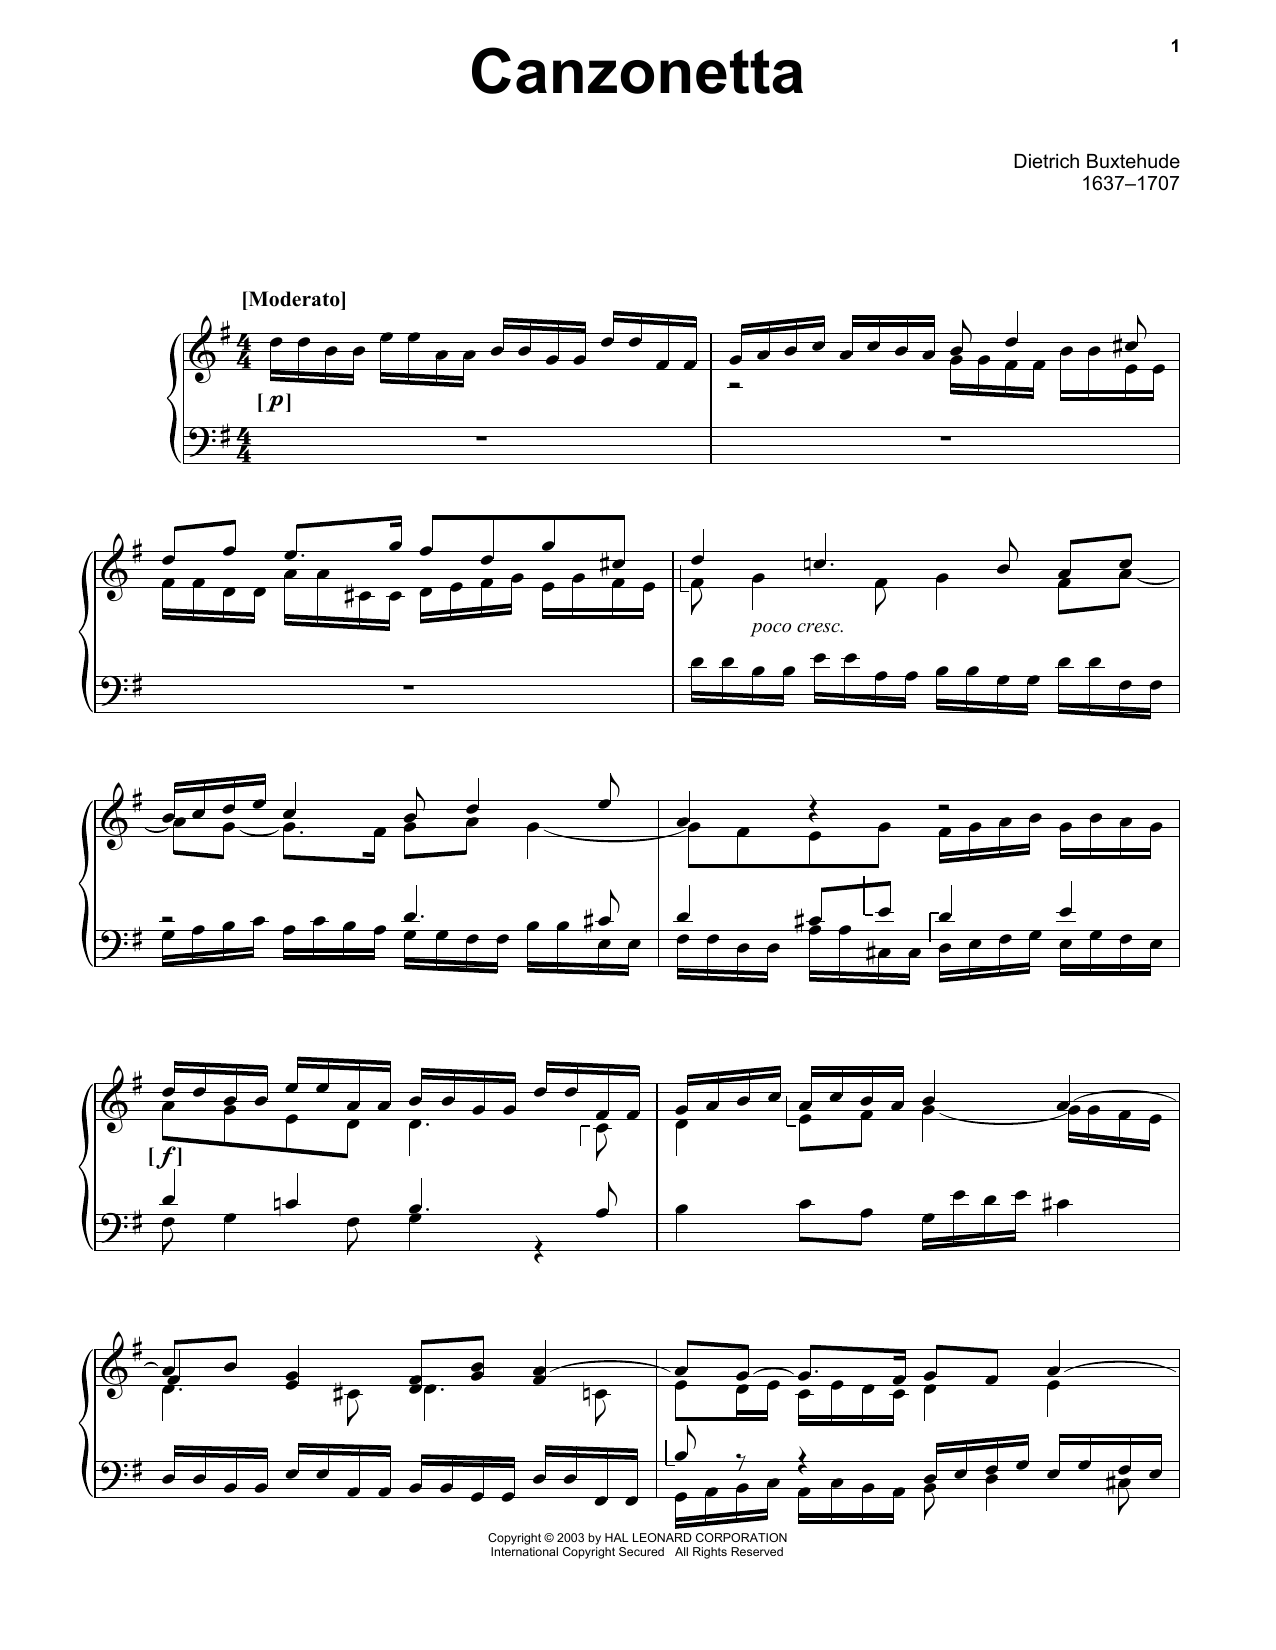 Dietrich Buxtehude Canzonetta In D Major sheet music notes printable PDF score